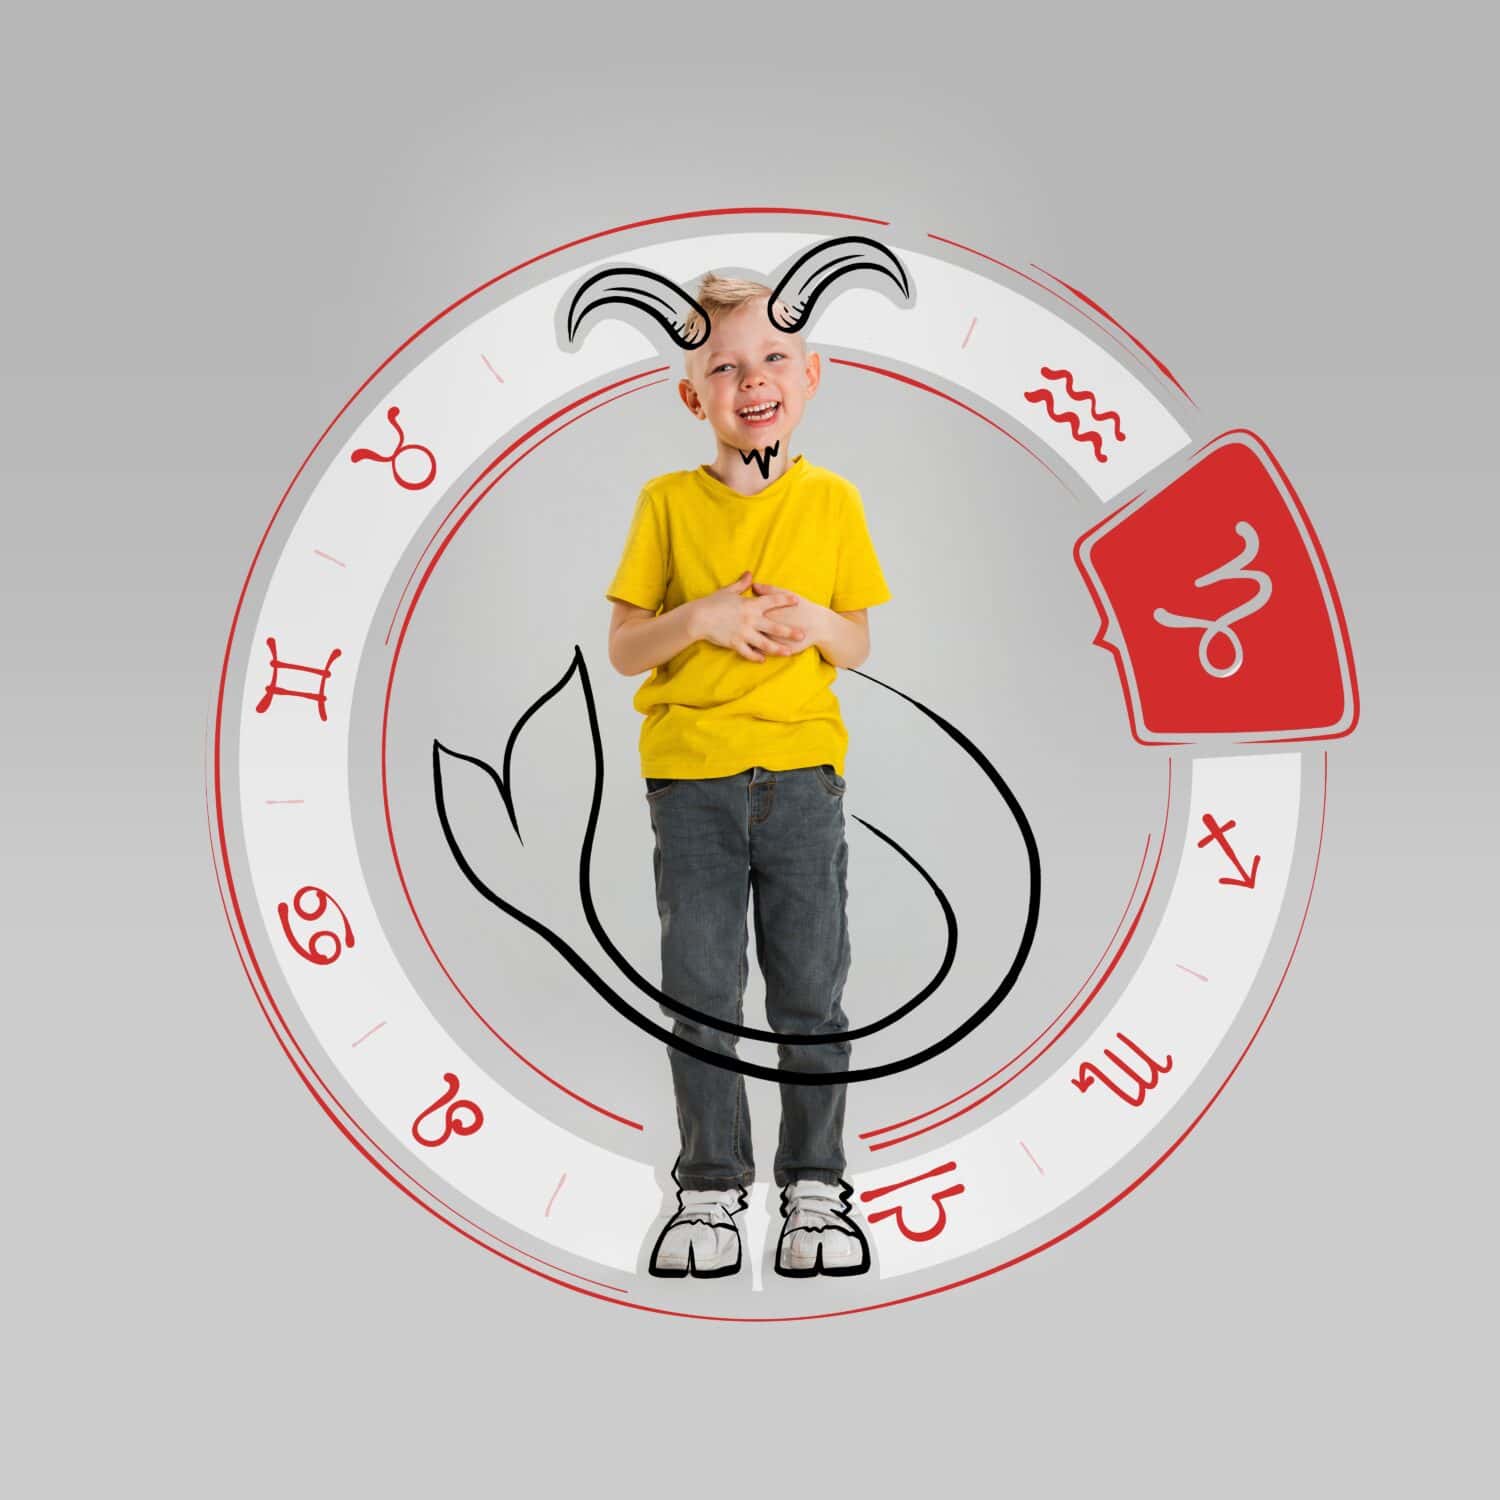 Capricorn. Thematic image of cute kid with drawing of zodiac signs isolated on grey background with pencil sketches. Concept of birthday, person's character, year, horoscope. Design for card